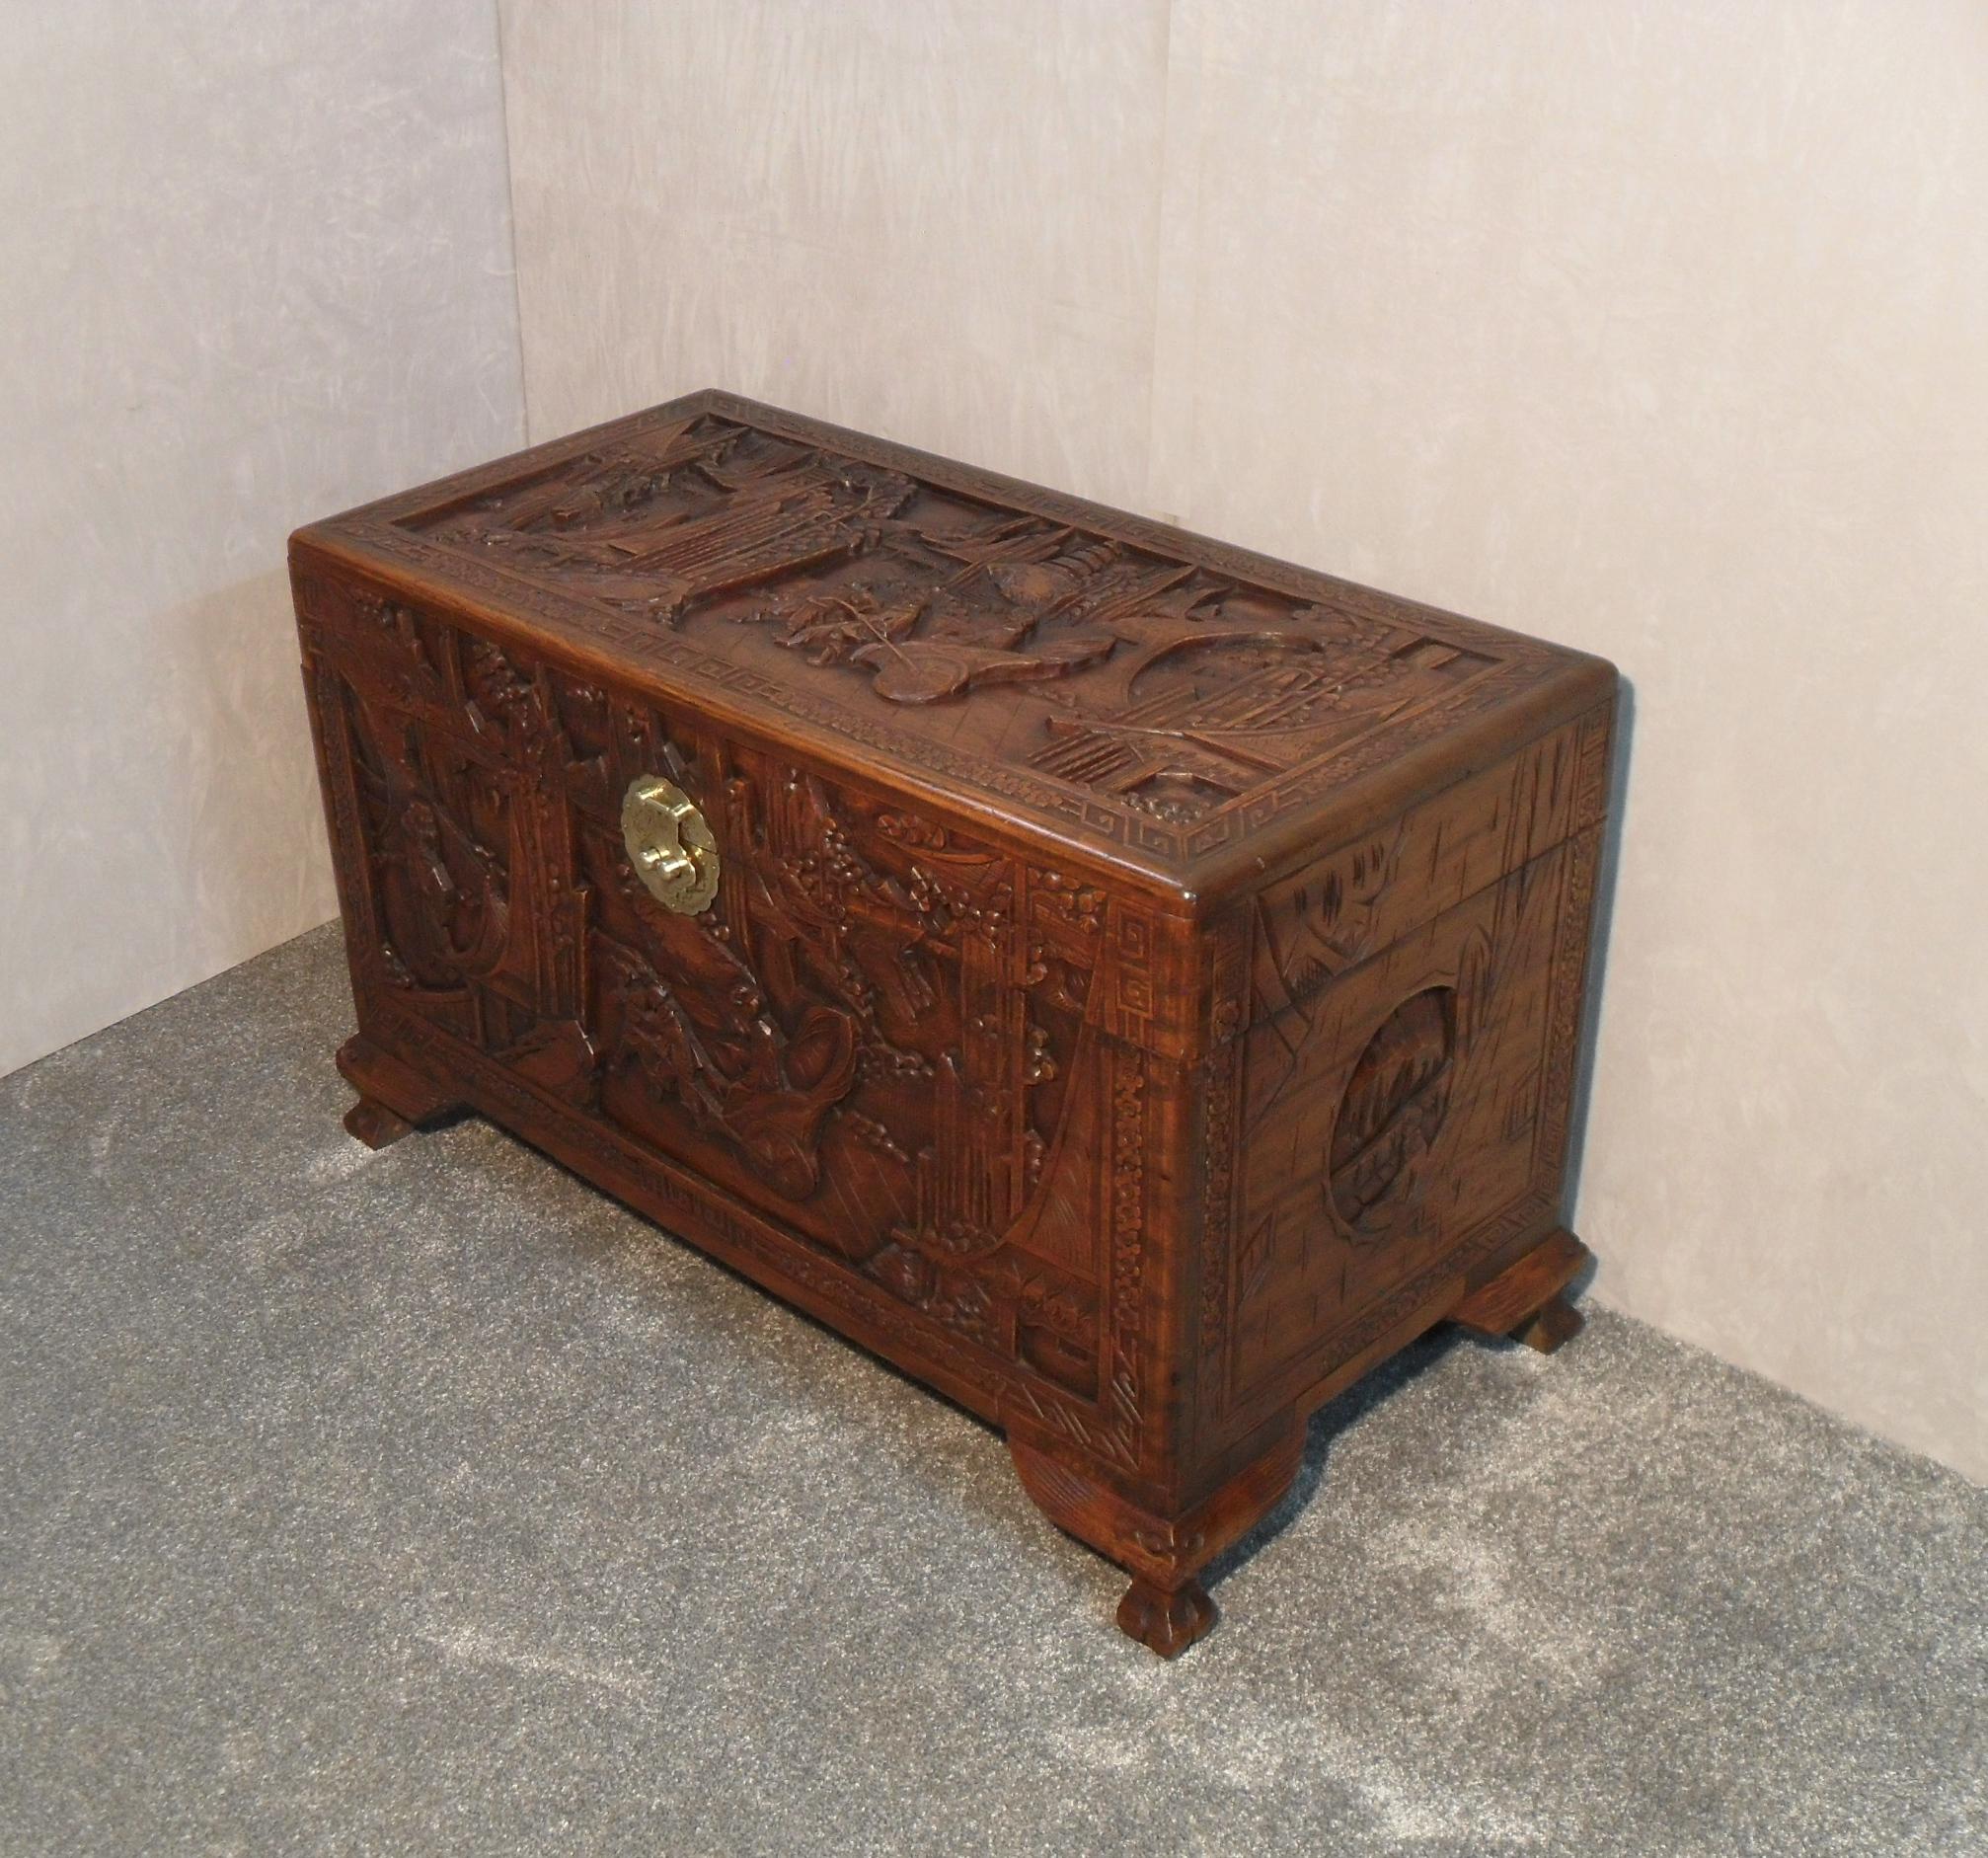 A very good quality and ornately carved freestanding Oriental camphor wood chest with carved scenes of a rickshaw cart, surrounded by trees and pagodas with a floral border. The chest retains its original engraved brass back plate and comes with a